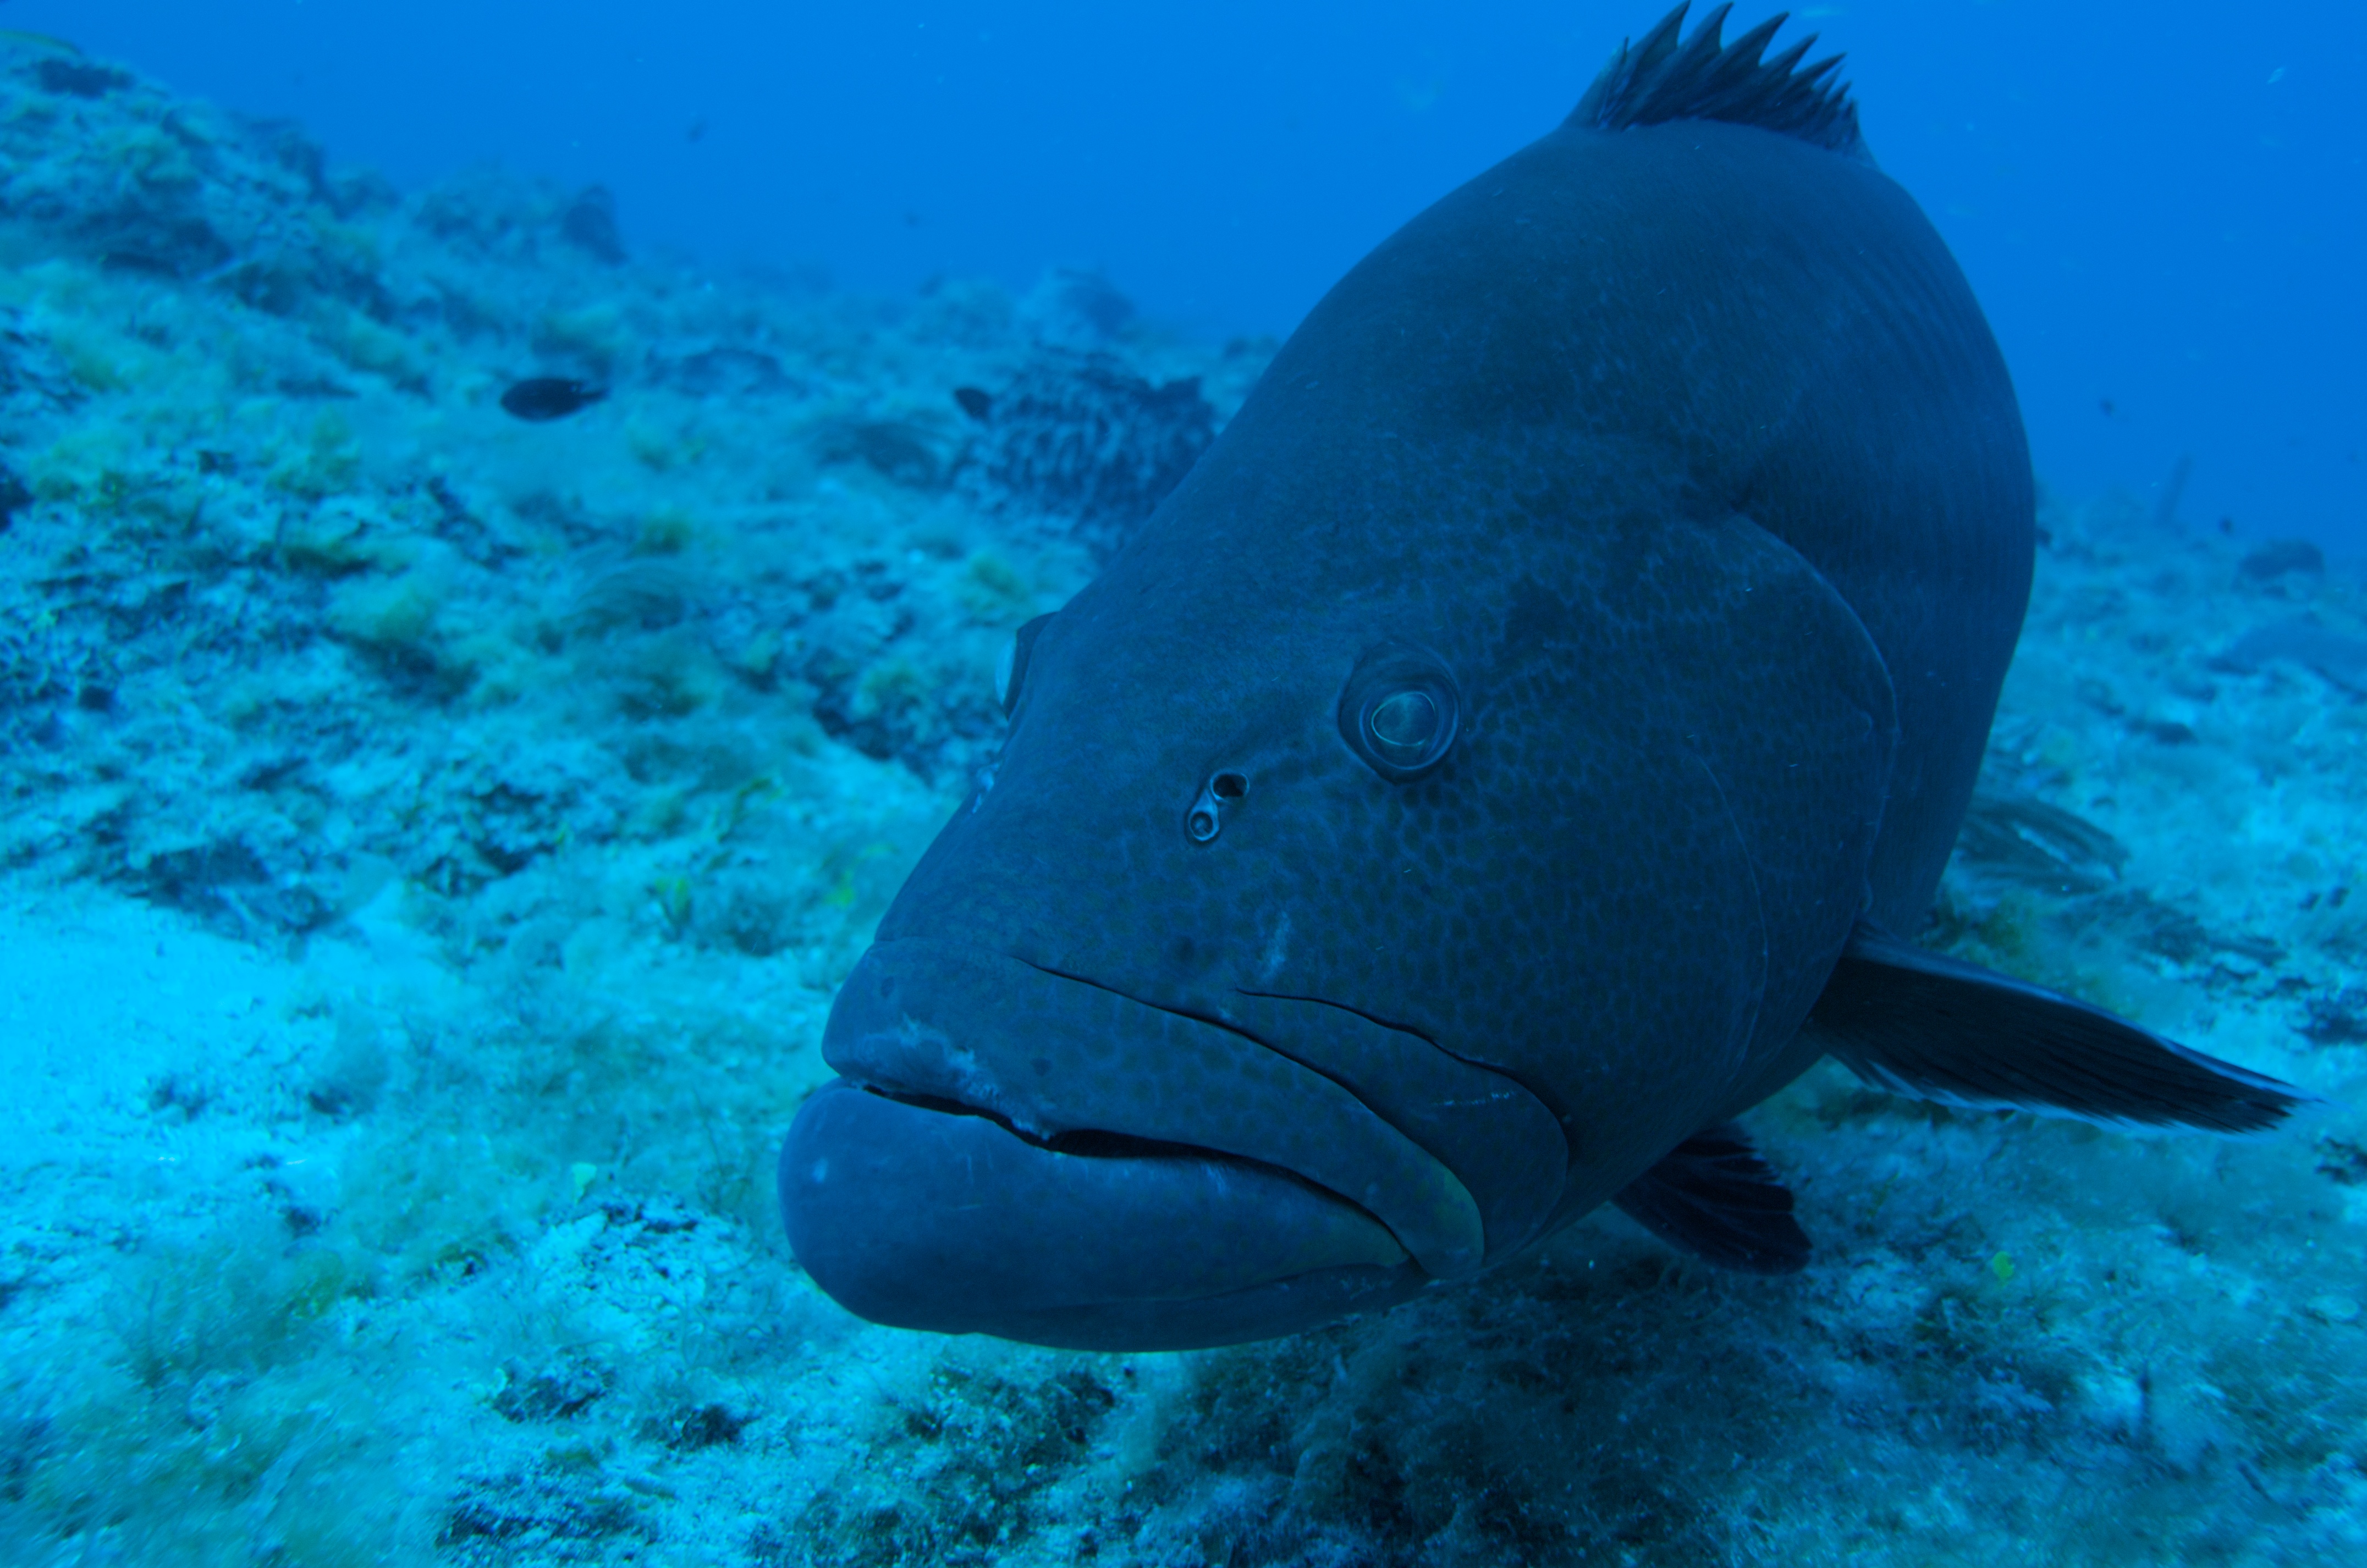 This black grouper was photographed on Riley's Hump, in the Dry Tortugas National Park. Riley's Hump is a well-documented multi-species spawning aggregation sight, where many varieties of snappers, groupers and jacks reproduce. Grunts are one of the most important forage sources for these breeder groupers. Photo credit: Don DeMaria